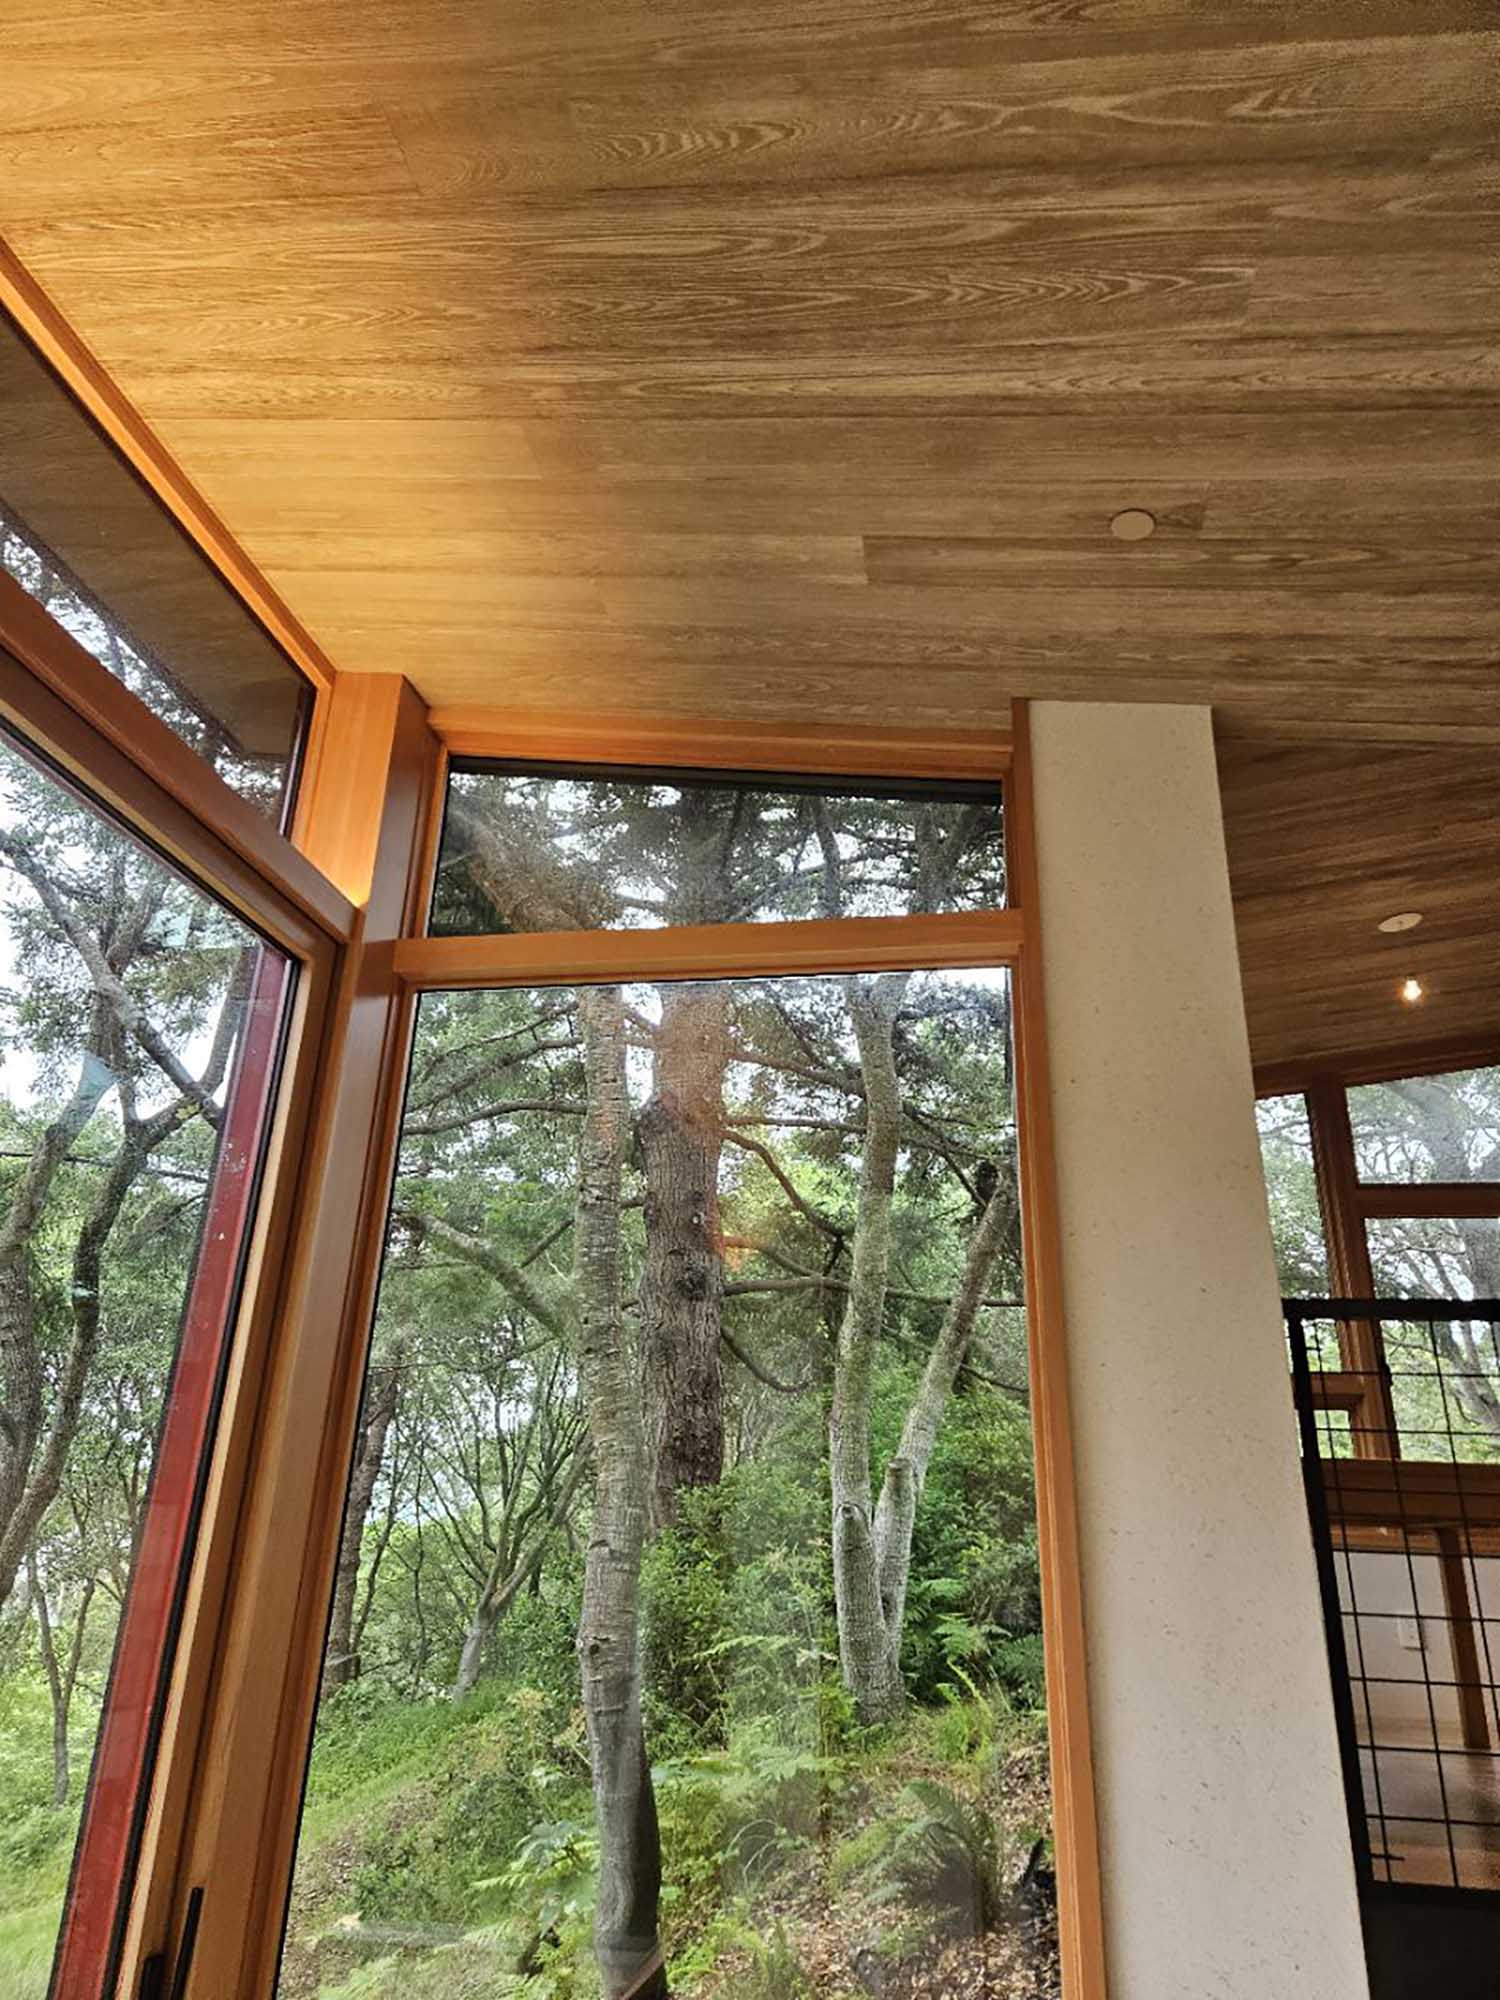 Add Window Film to Your ADU like this one in Bolinas, CA. Installed by ClimatePro.